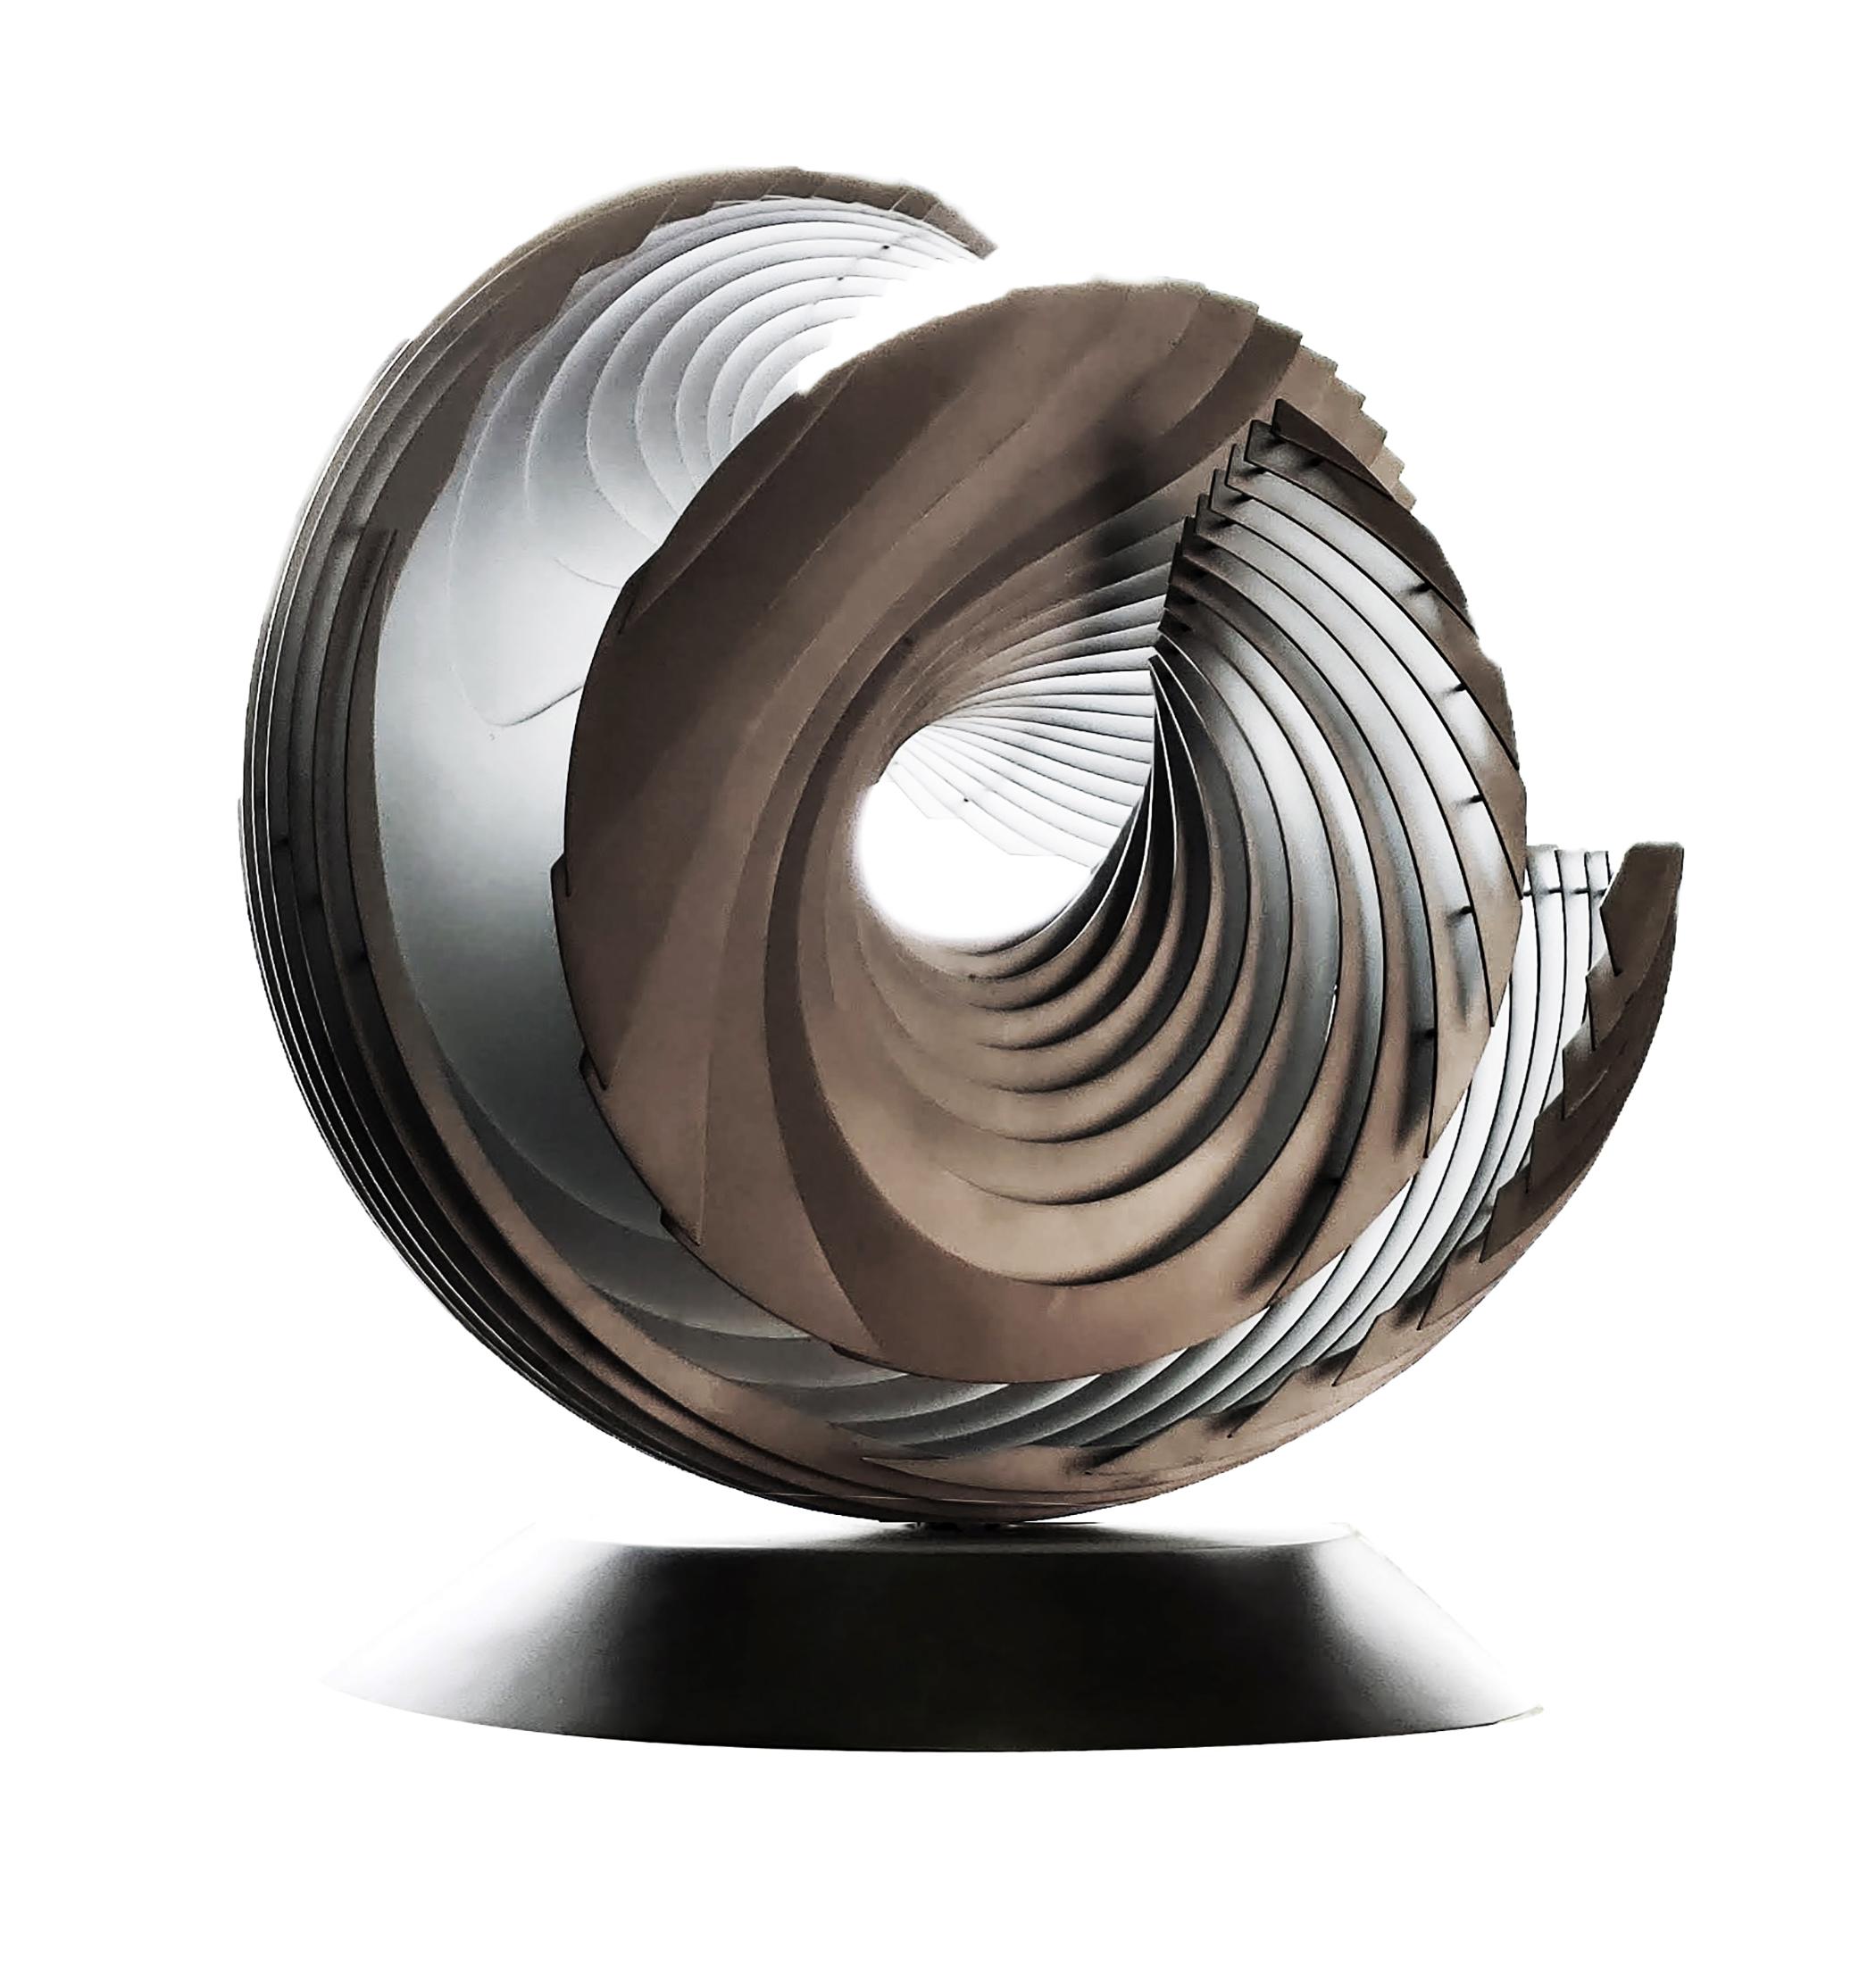 Lyle London Abstract Sculpture – WHORL